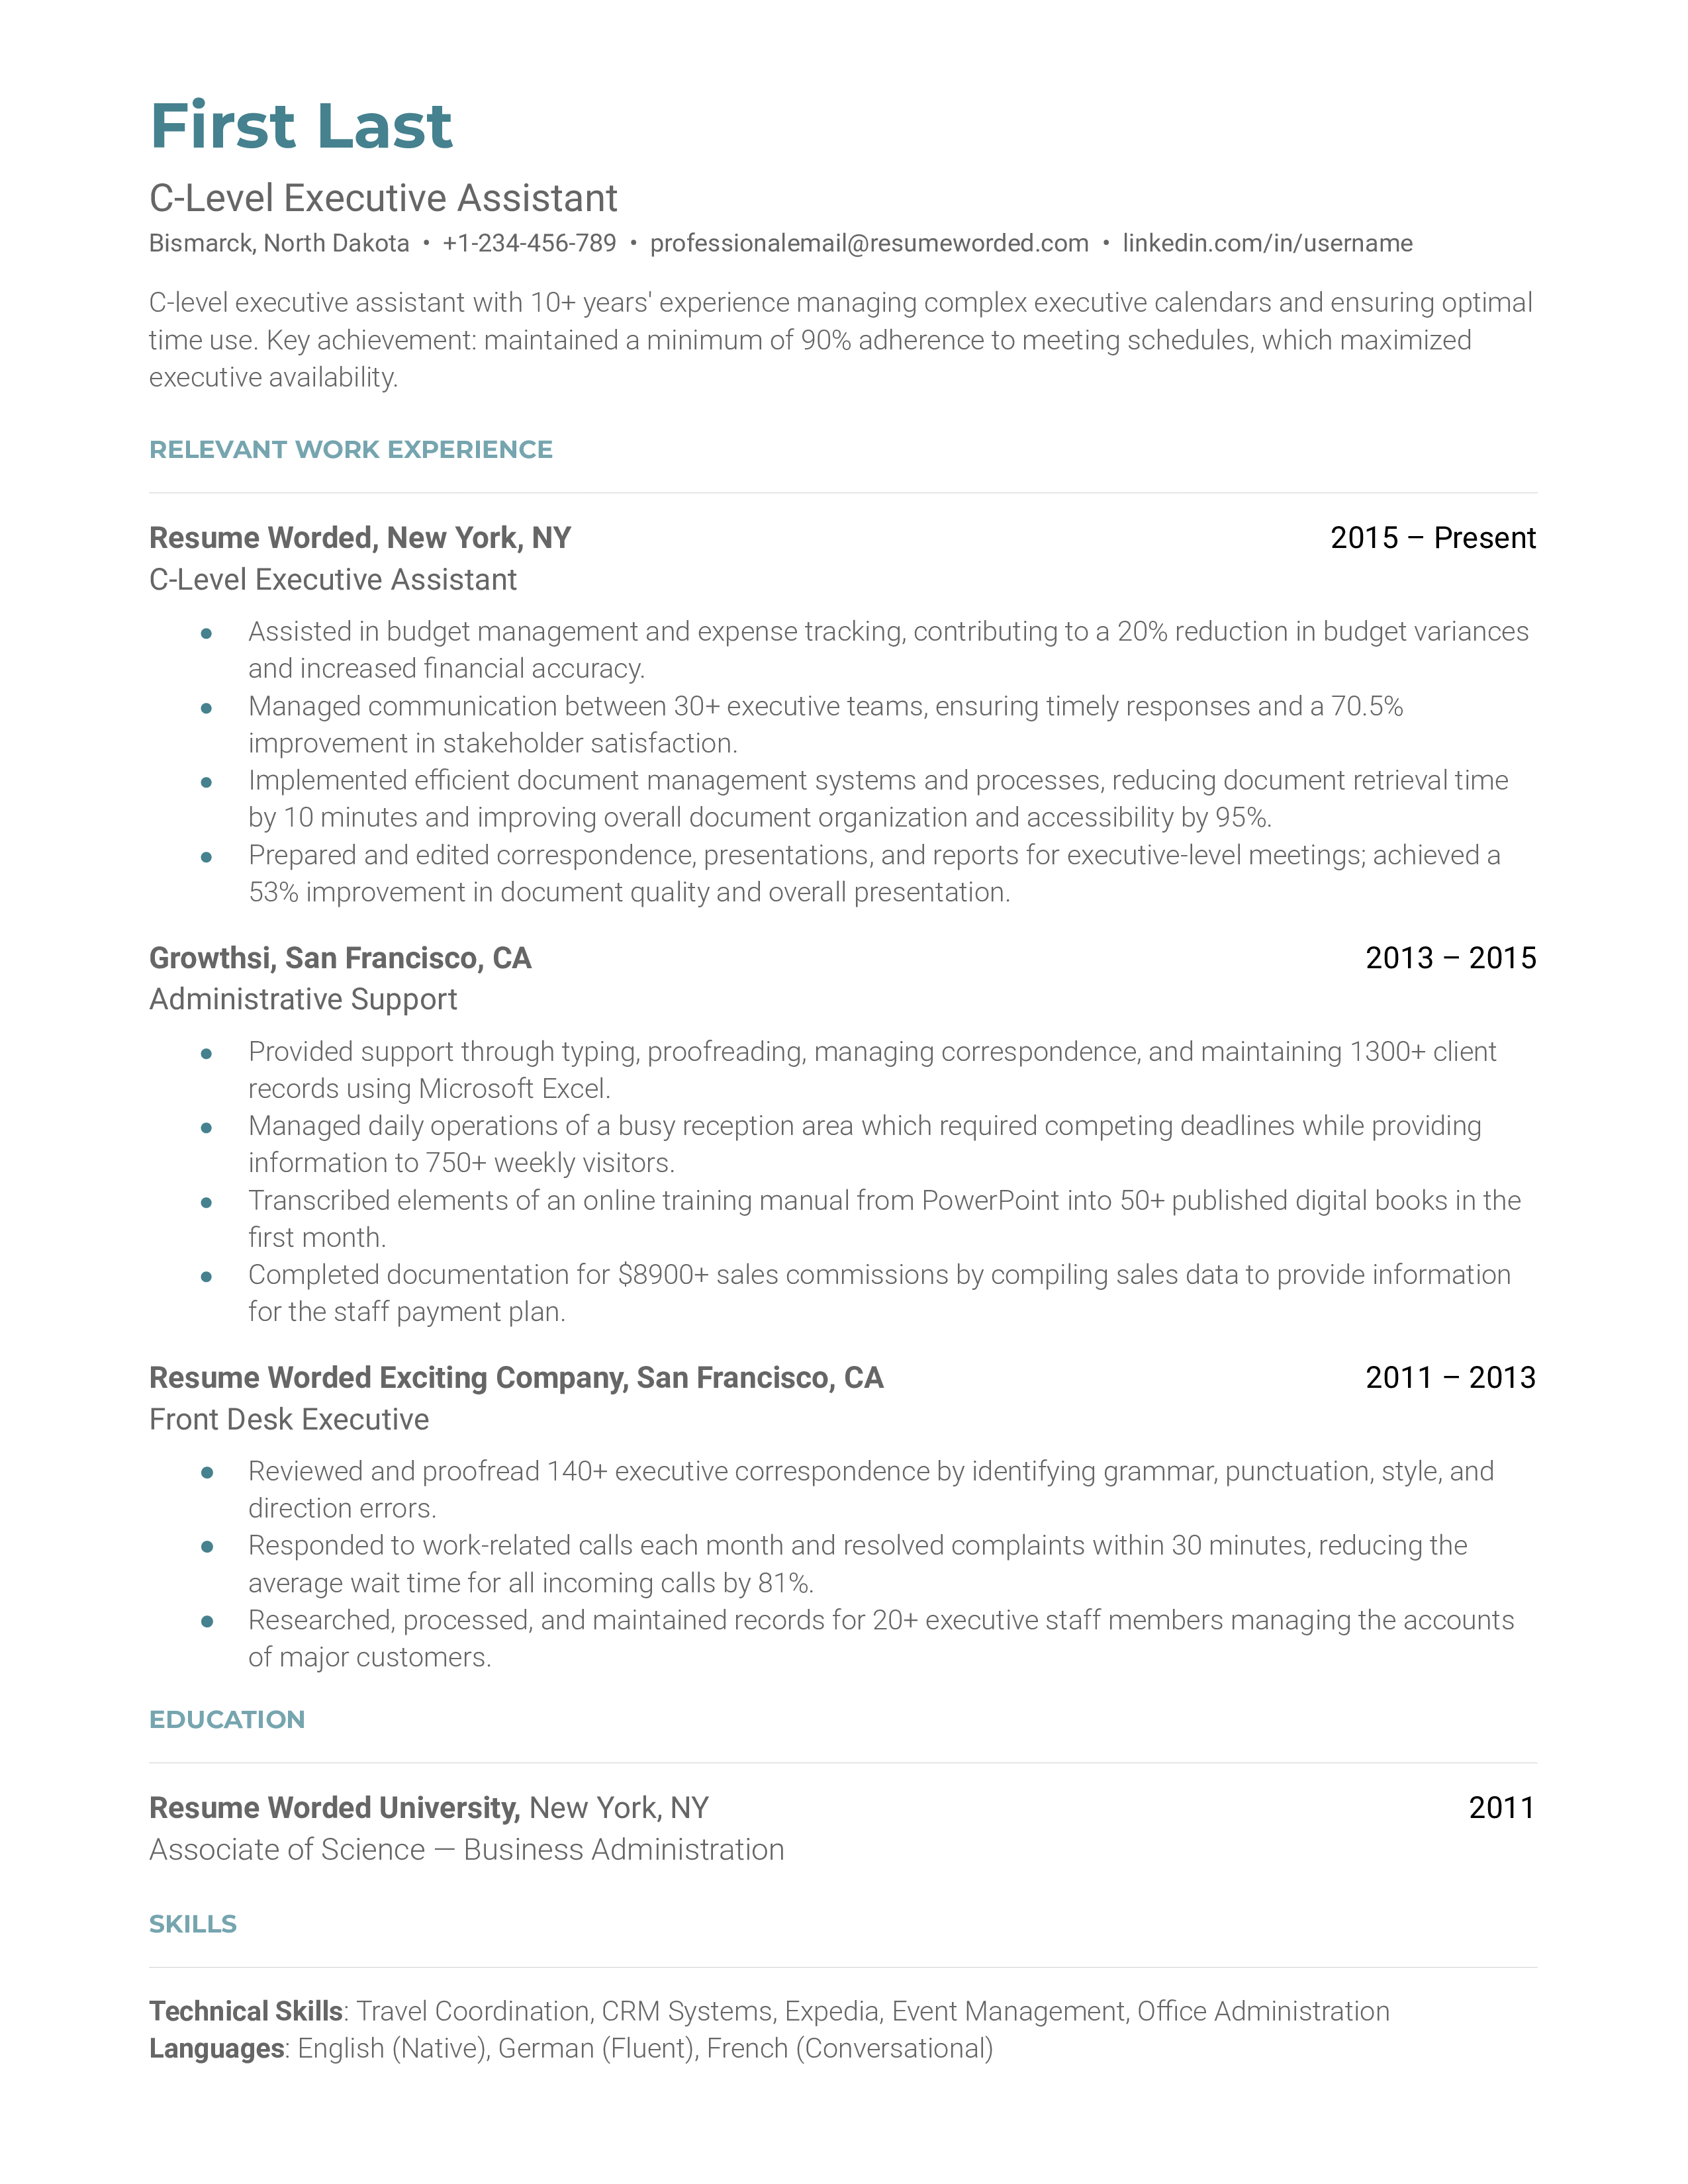 A well-structured CV showcasing software proficiency and crisis management skills for a C-Level Executive Assistant role.